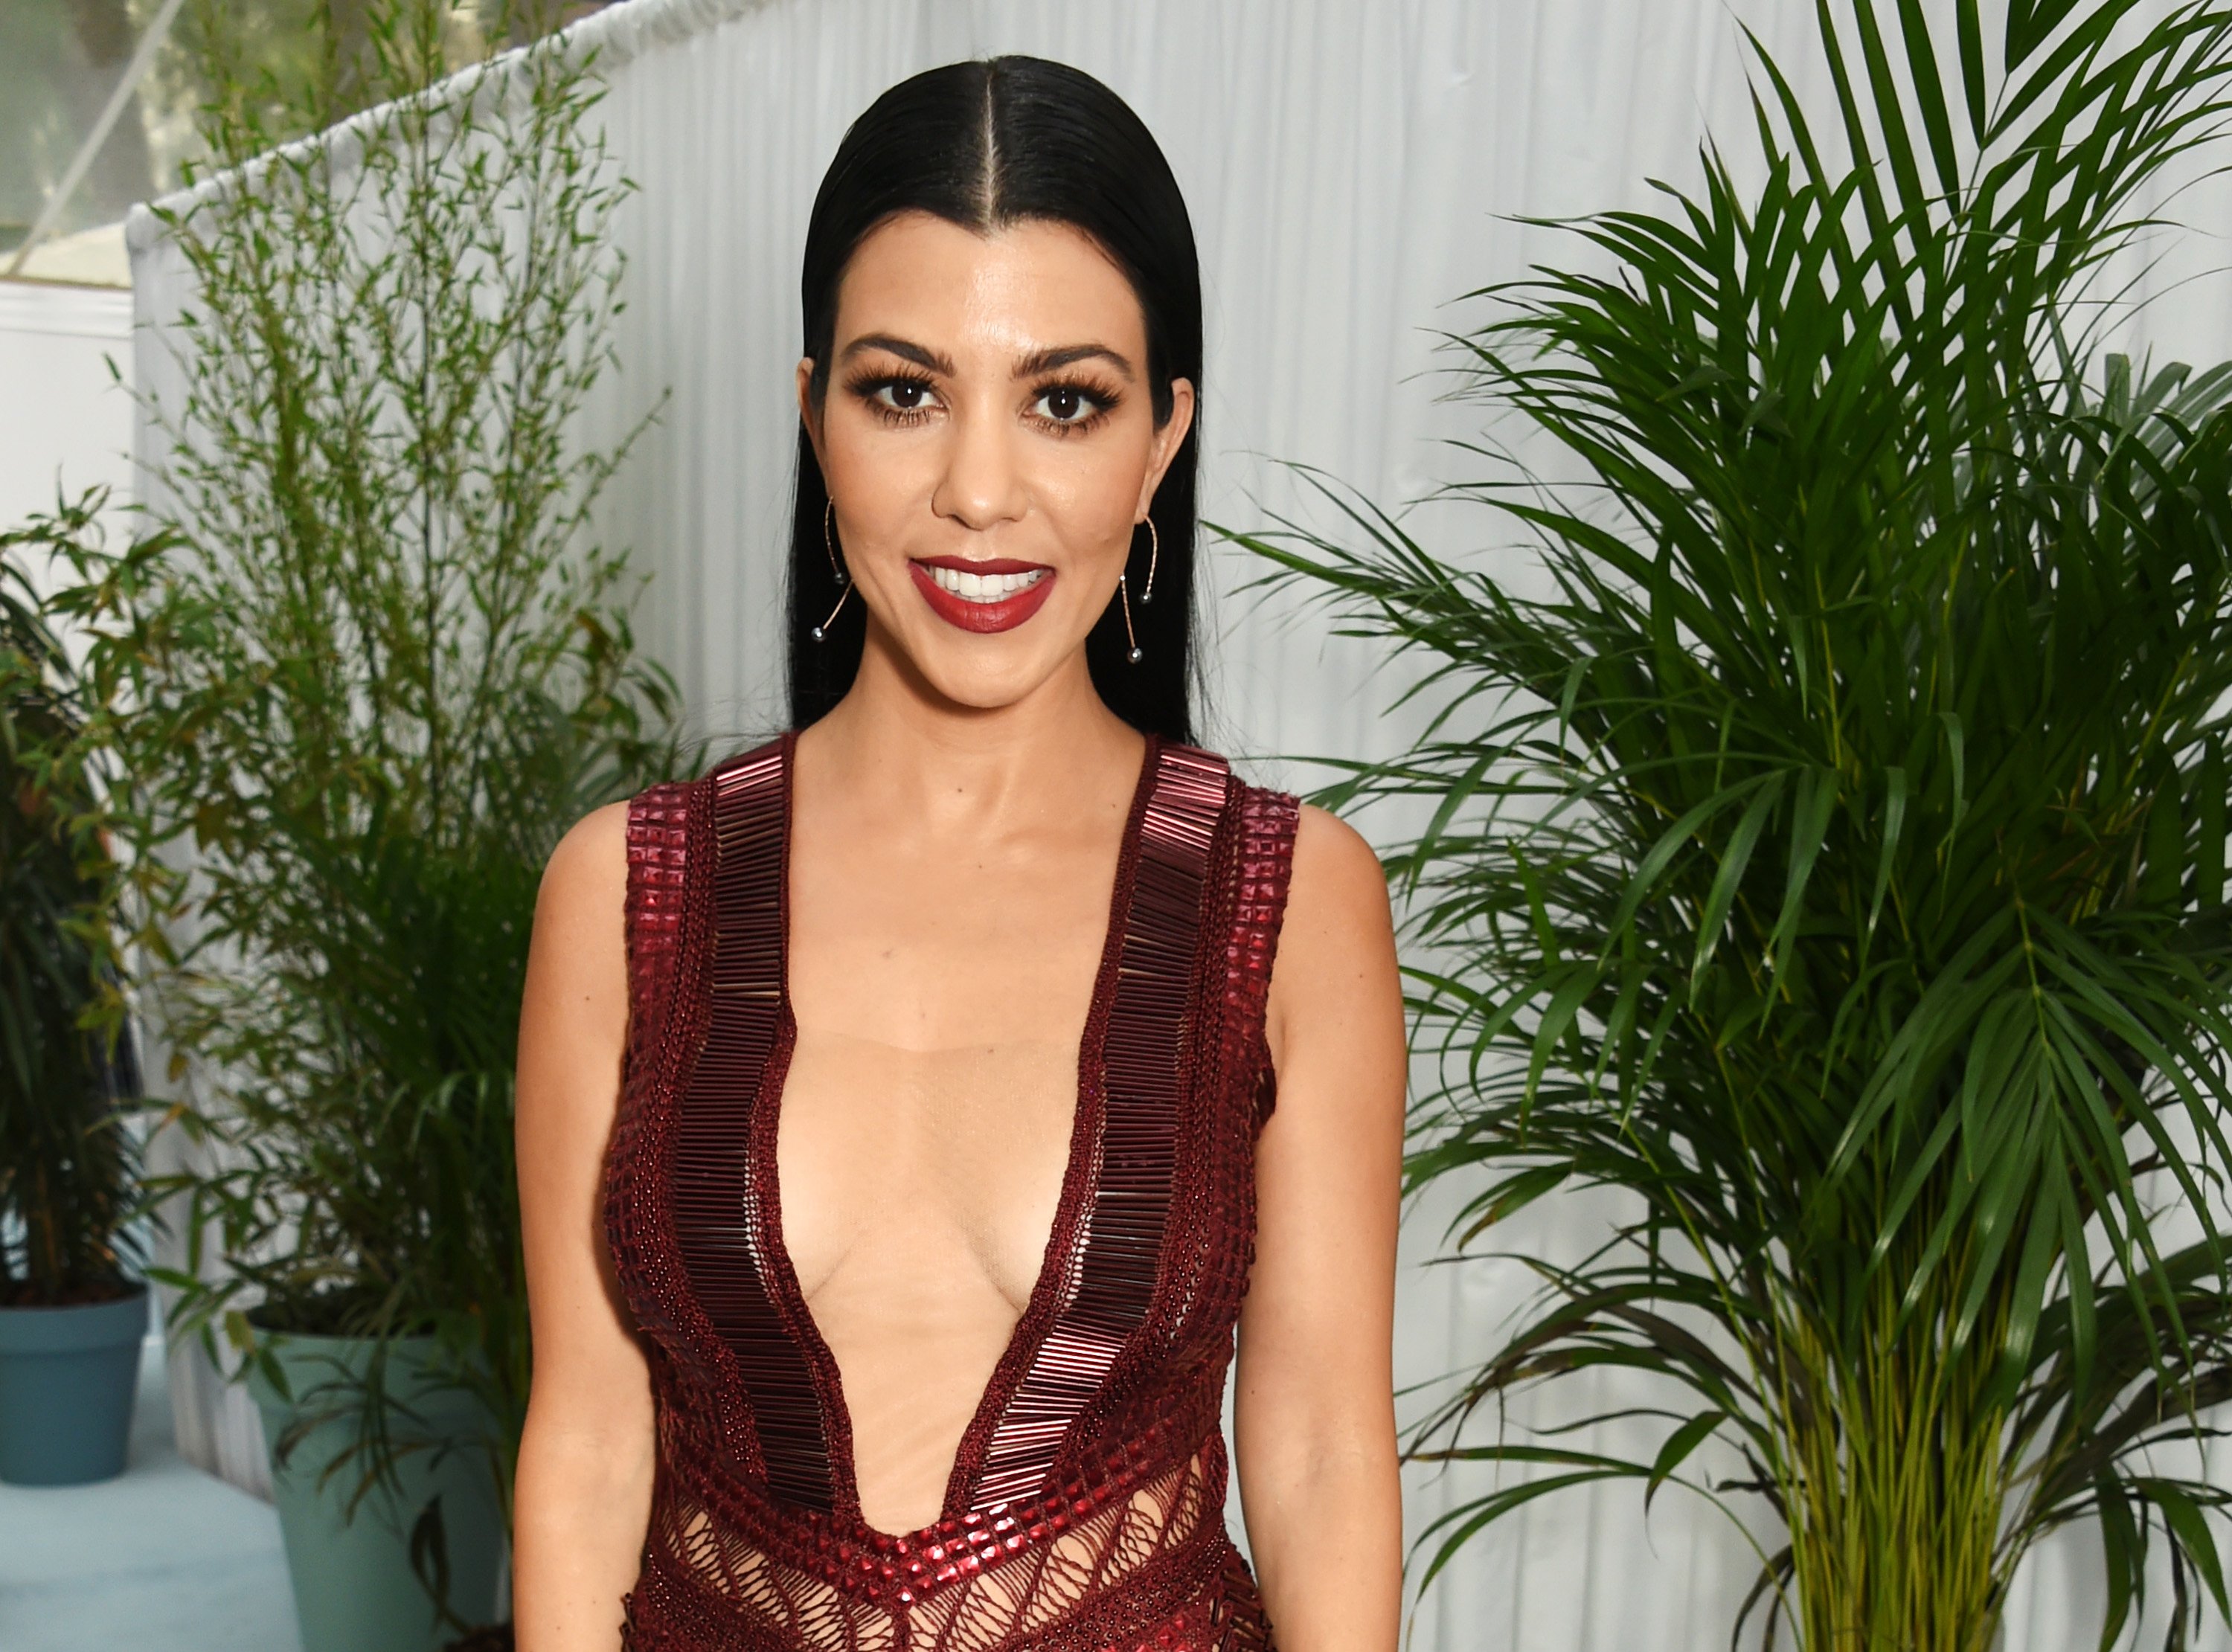 Kourtney Kardashian pictured at the Glamour Women of the Year Awards, 2016, London, United Kingdom. | Photo: Getty Images